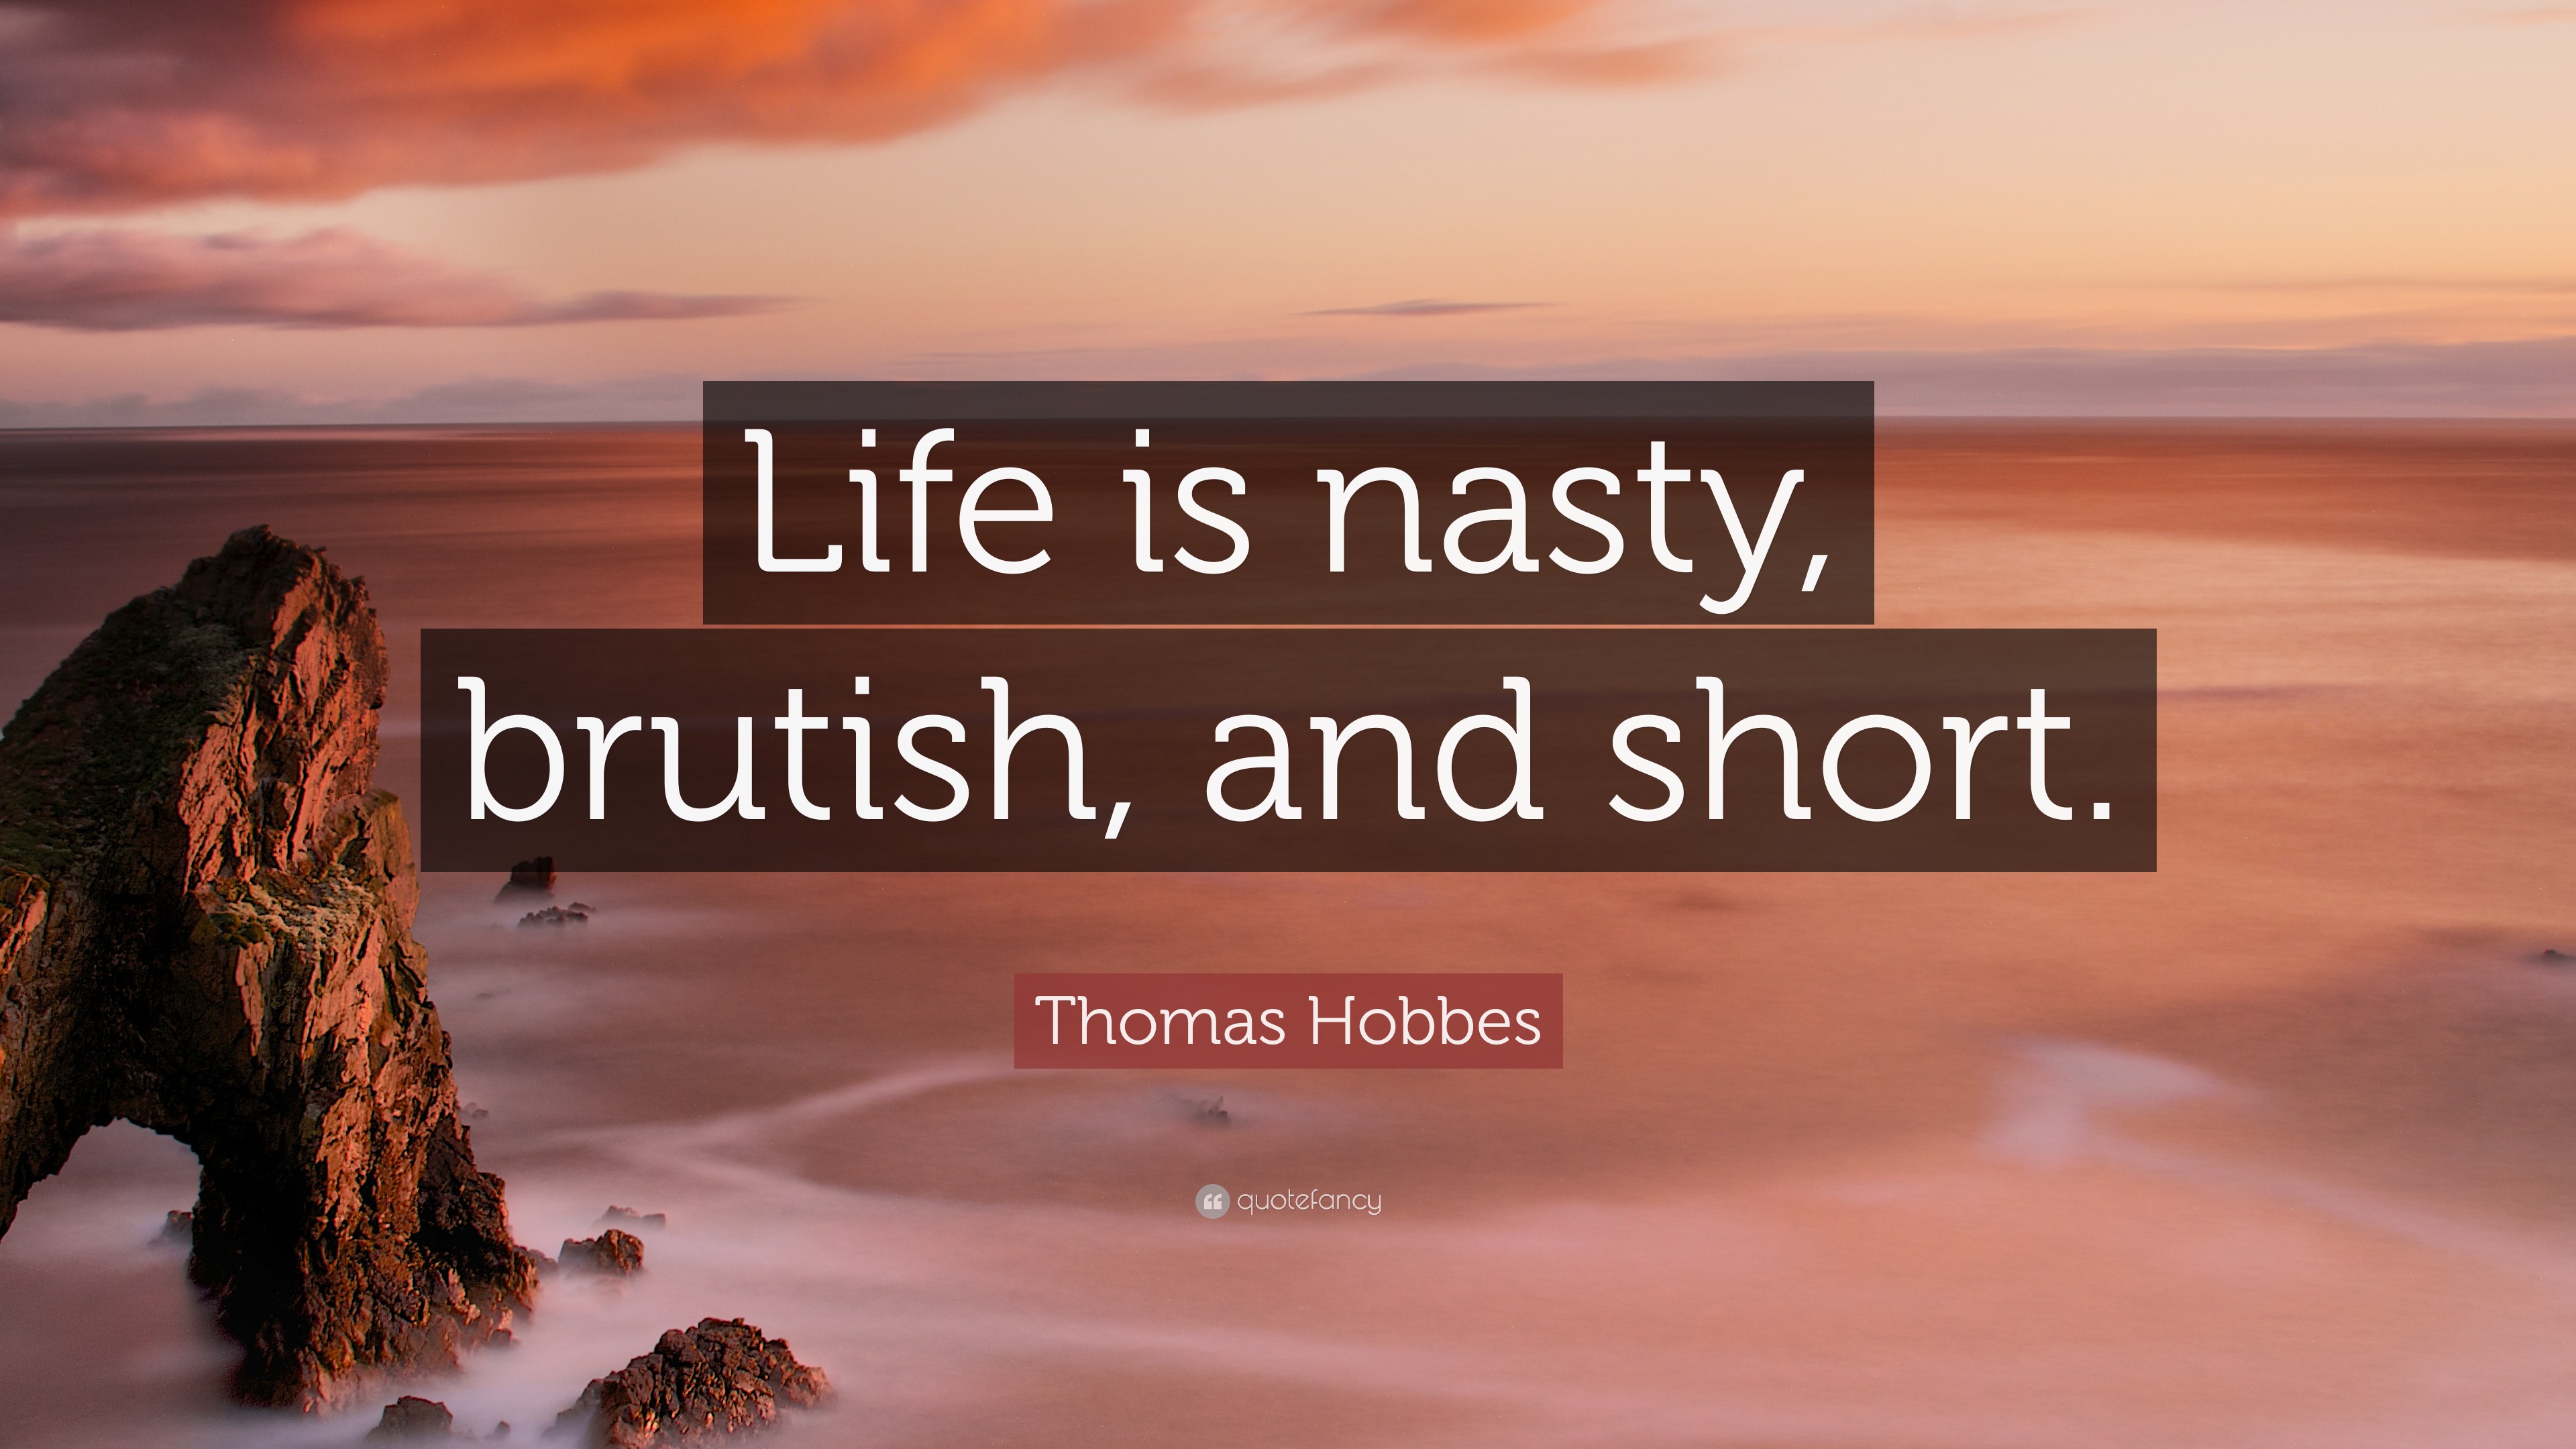 life is nasty brutish and short